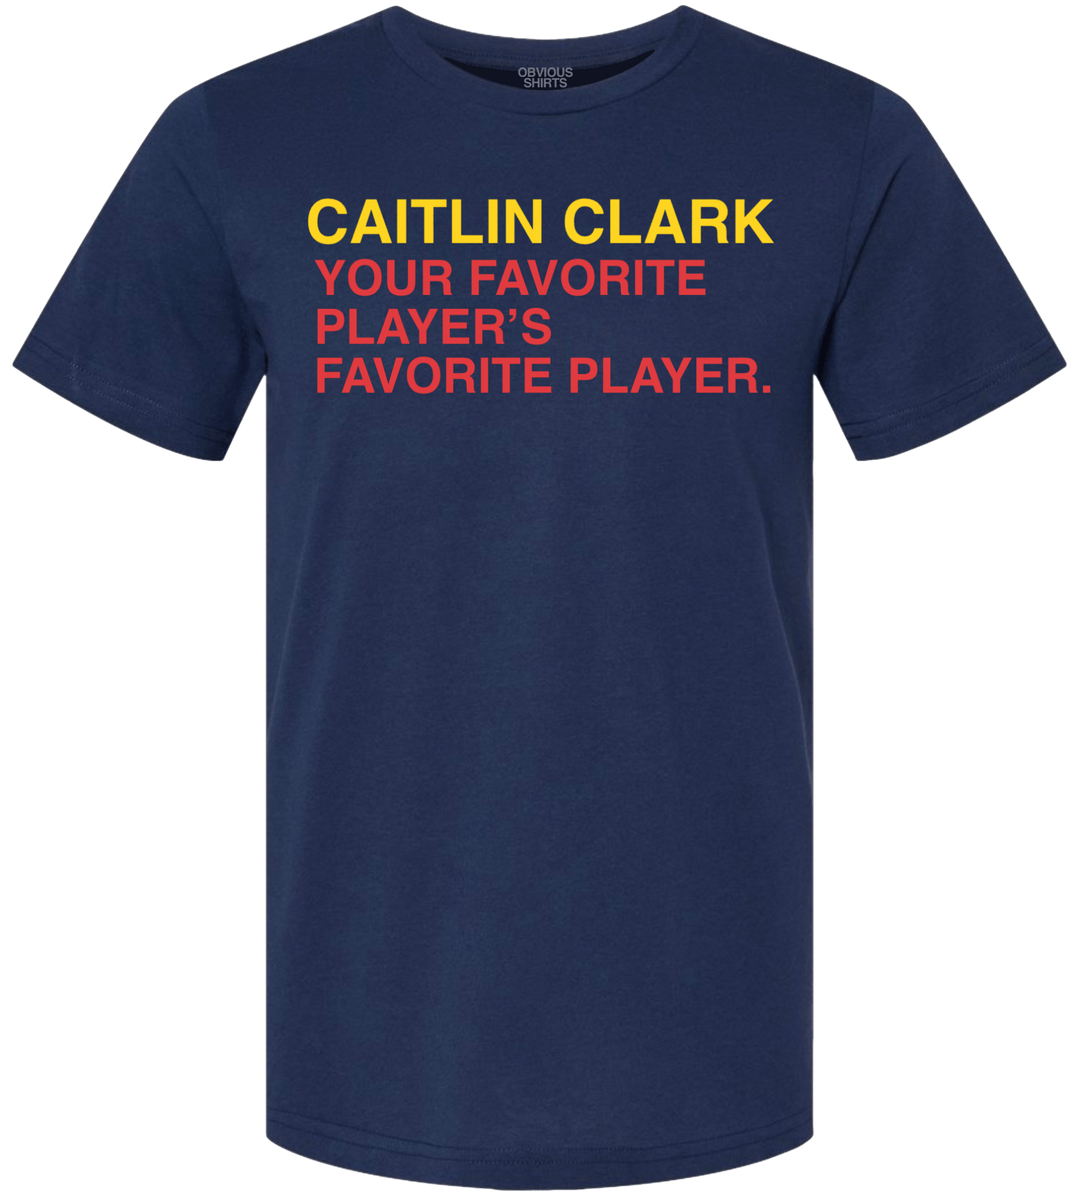 YOUR FAVORITE PLAYER'S FAVORITE PLAYER. - OBVIOUS SHIRTS